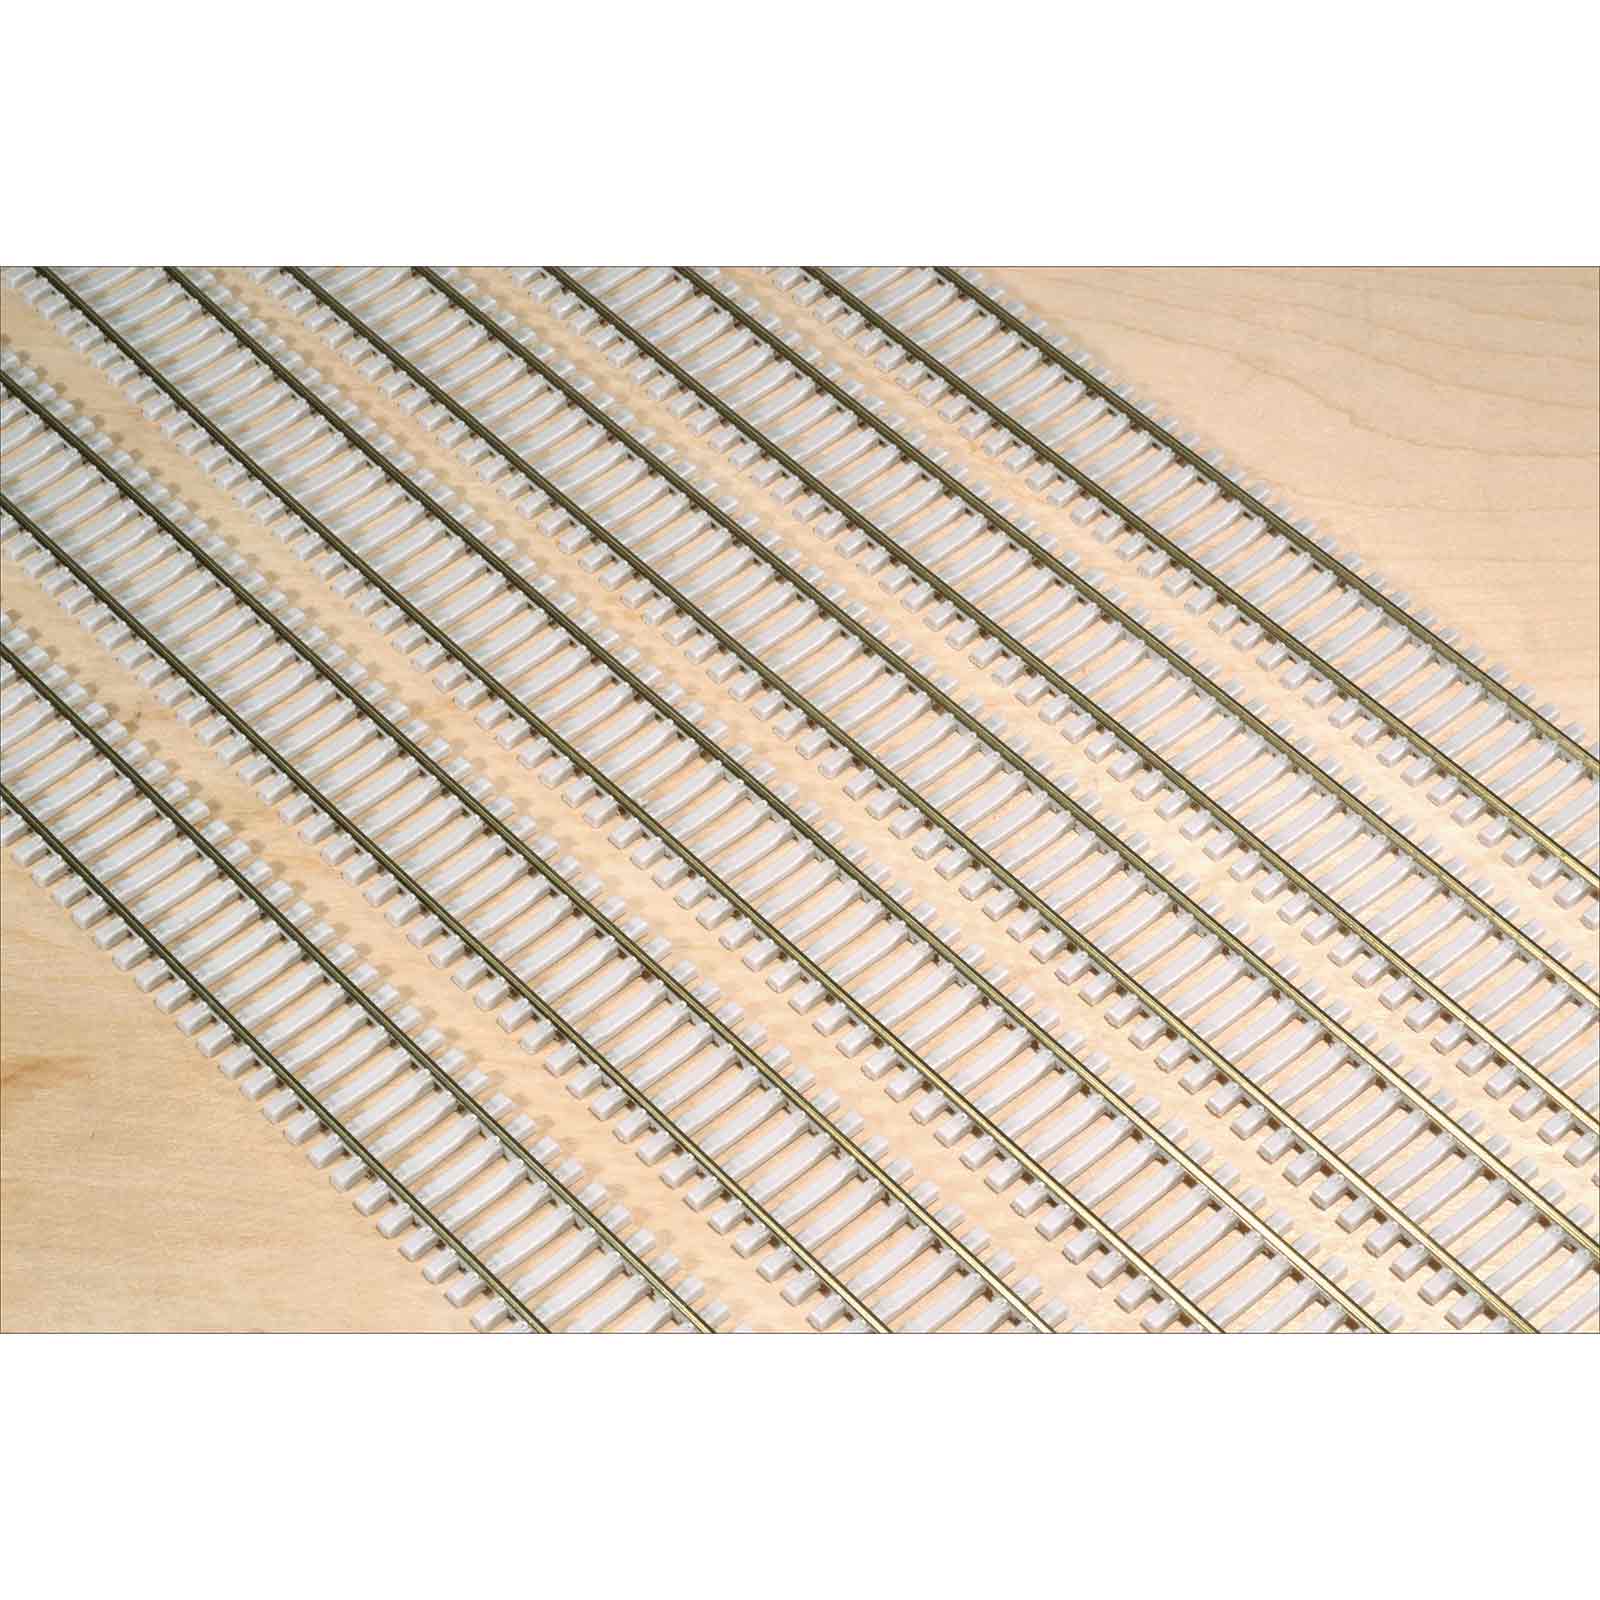 HO Scale Code 83 Flex Track with Concrete Ties, Bundle of 6 Pieces - Micro - Mark Track